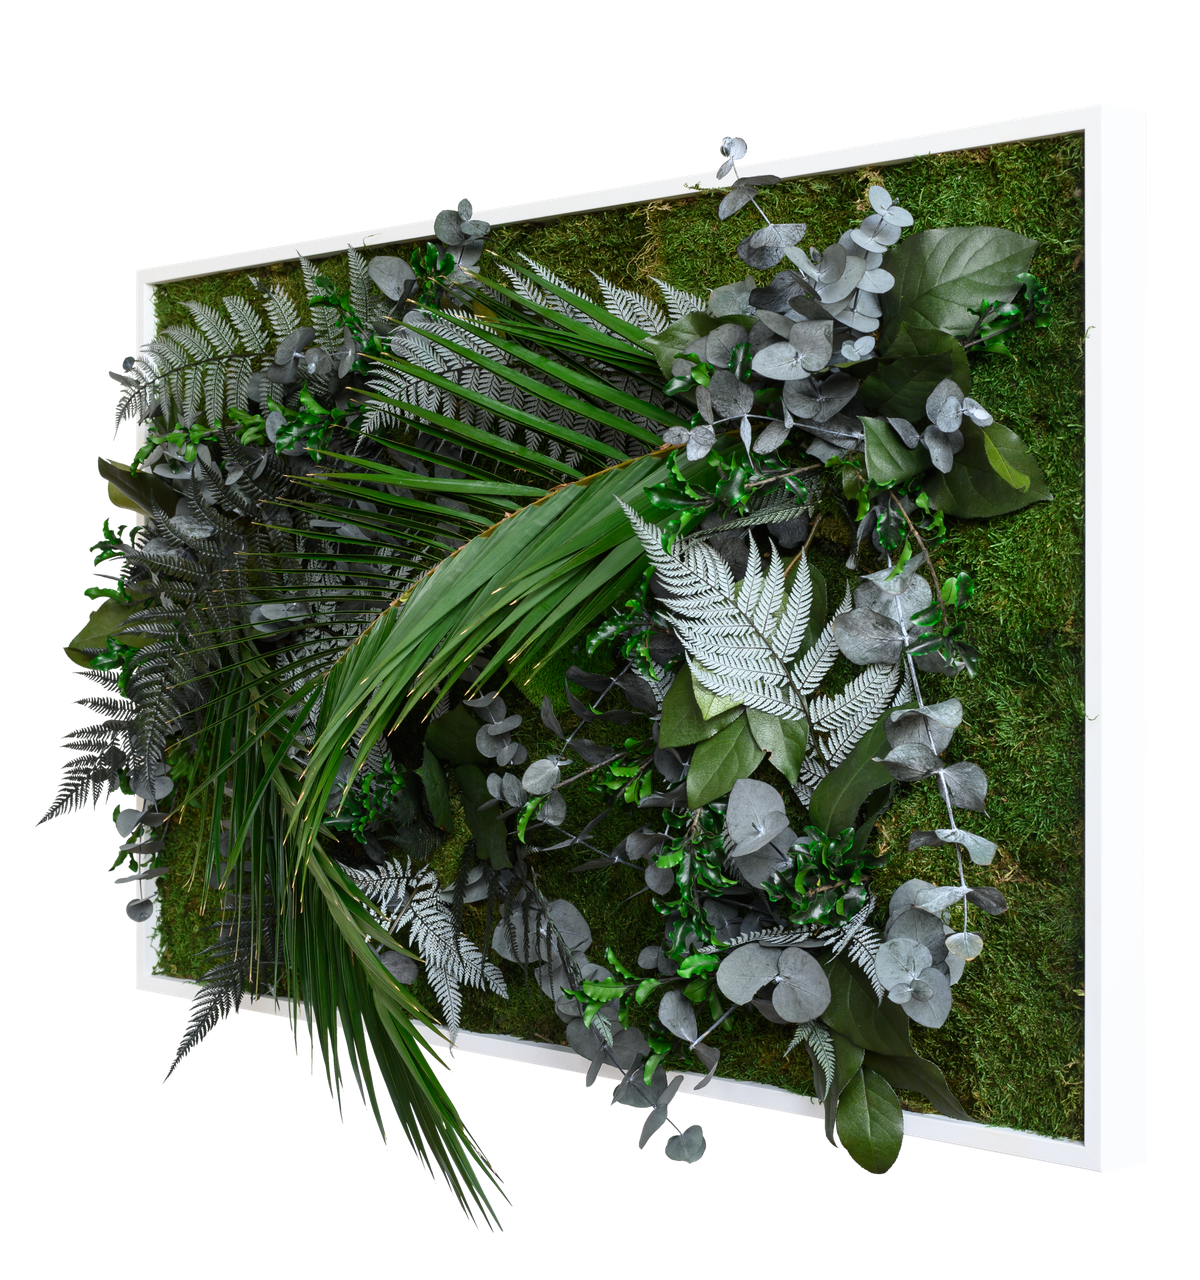 Jungle Rectangular Plant and Moss Wall Art (100x60cm)-Wall Decor-MOSS PICTURES, MOSS WALL ART, PLANT WALL ART, PLANTS-Forest Homes-Nature inspired decor-Nature decor